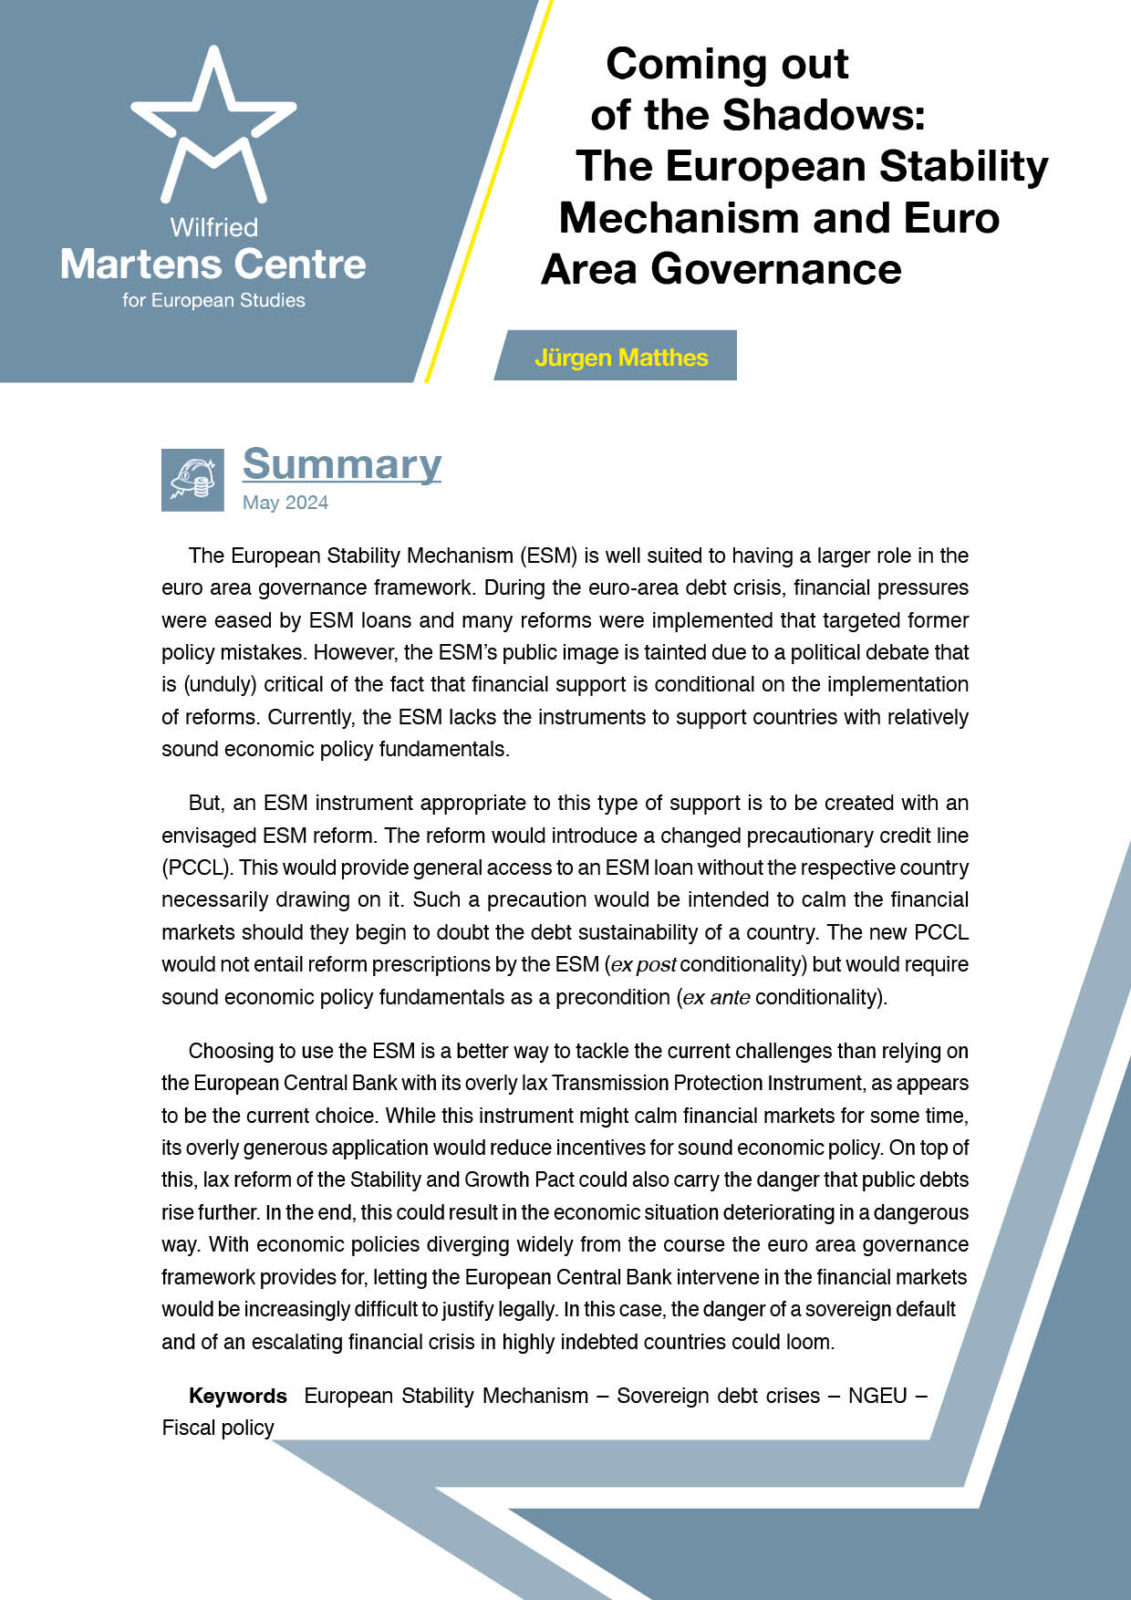 Coming out of the Shadows: The European Stability Mechanism and Euro Area Governance